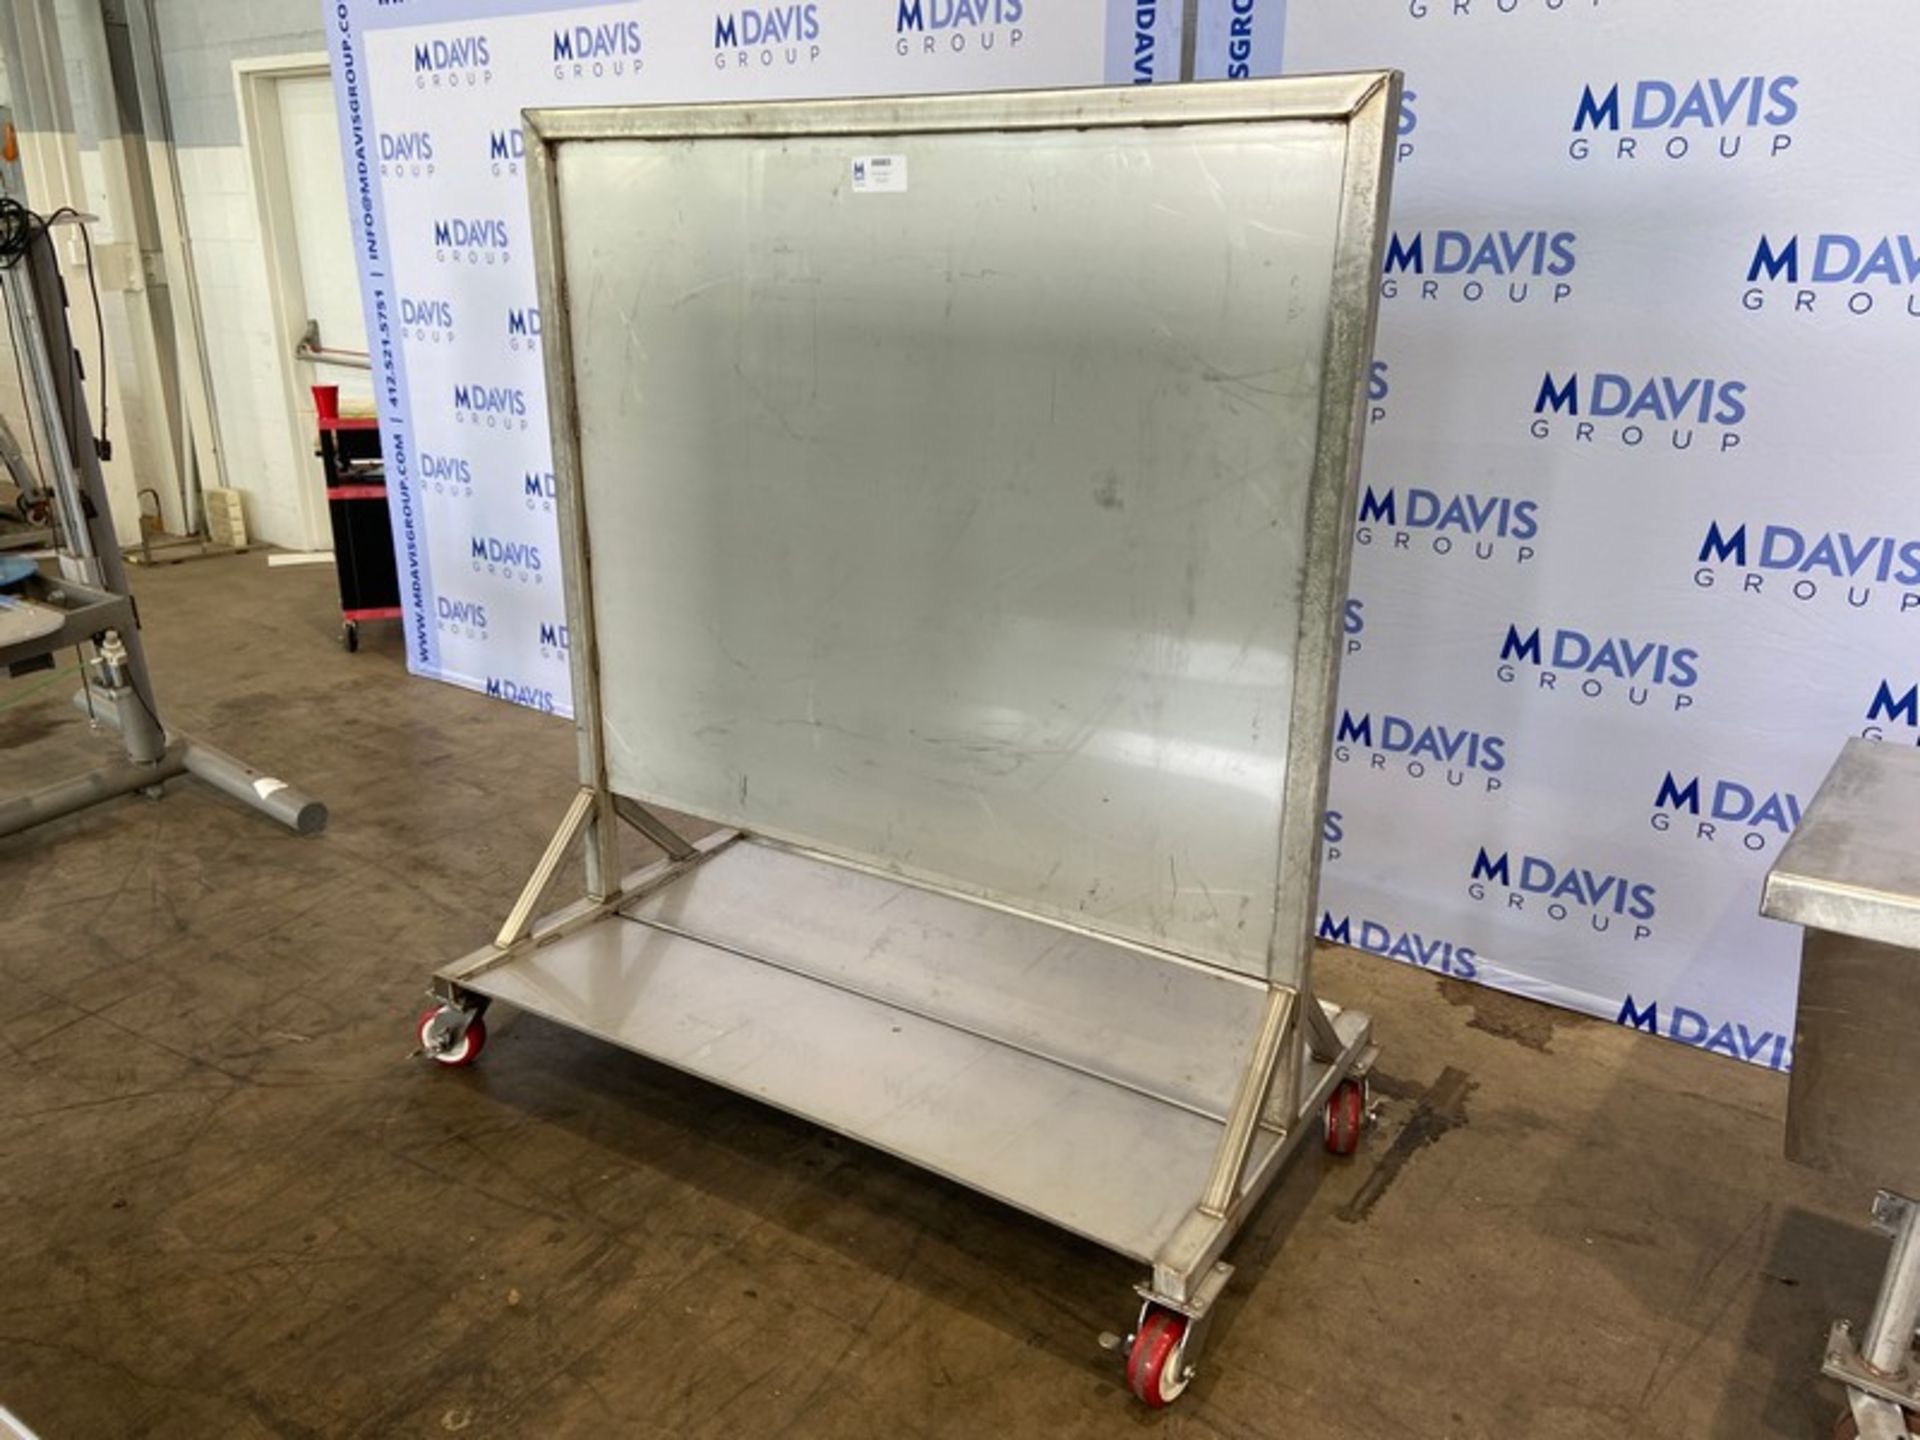 S/S Shields,Overall Dims.: Aprox. 60" L x 32" W x 68" H, Mounted on S/S Portable Frame (INV#